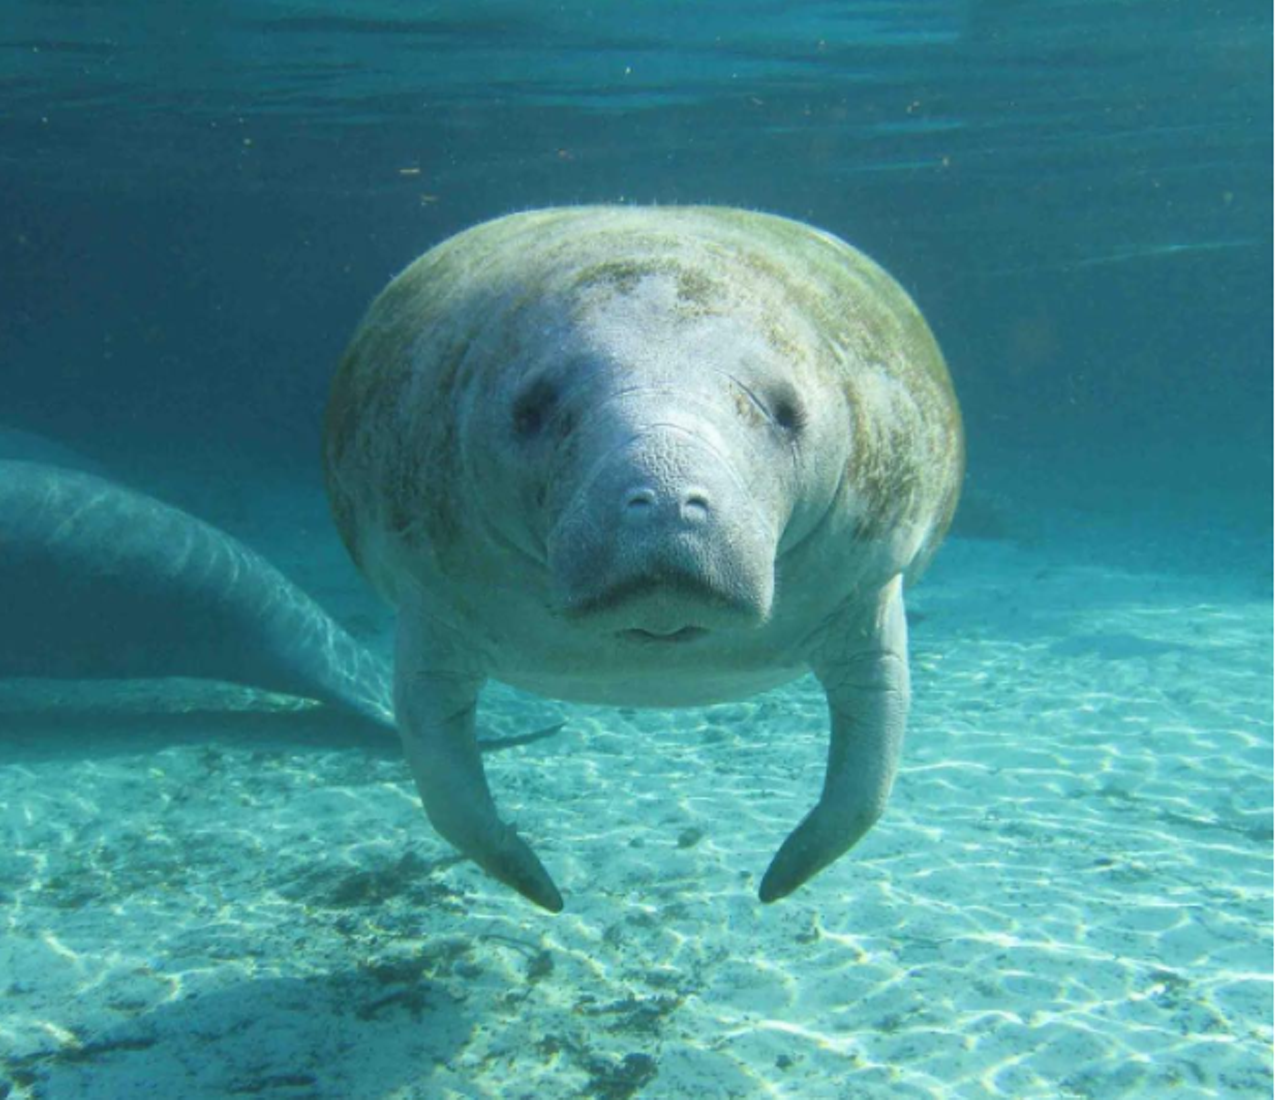 And manatees!
Photo via stoptheslaughterfl/Instagram